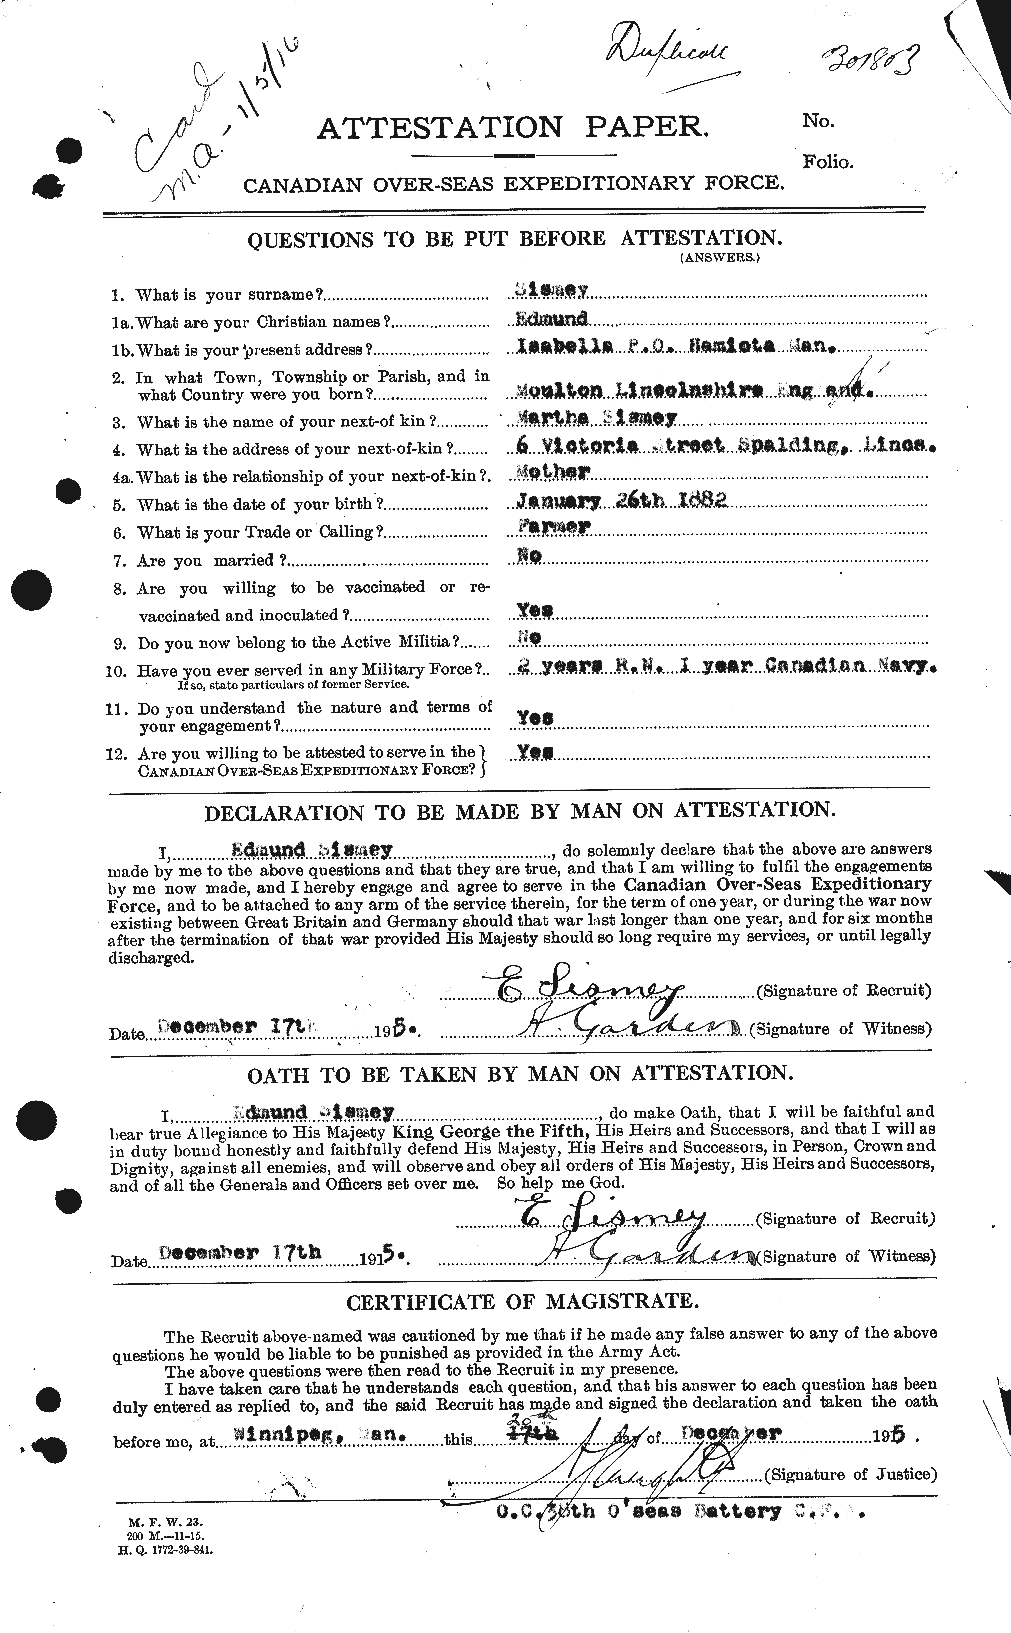 Personnel Records of the First World War - CEF 099554a